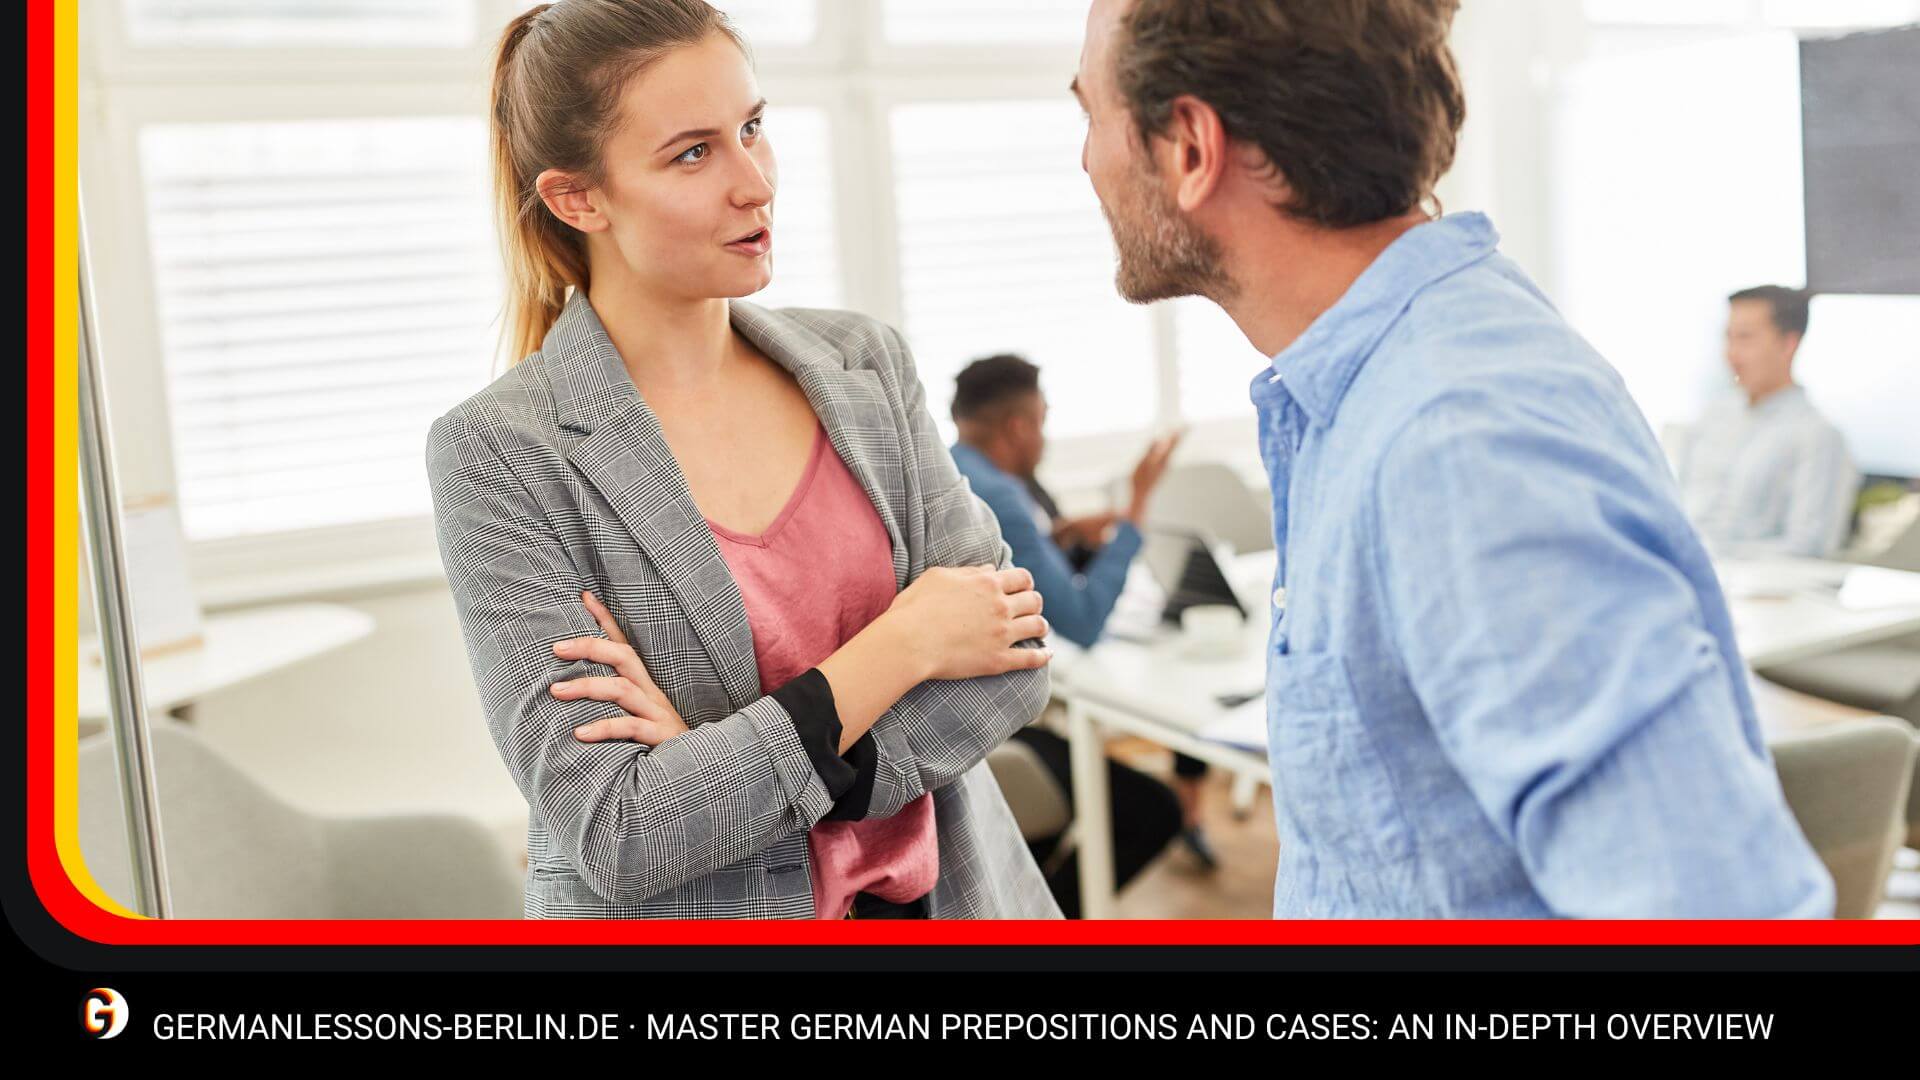 Master German Prepositions and Cases: An In-Depth Overview